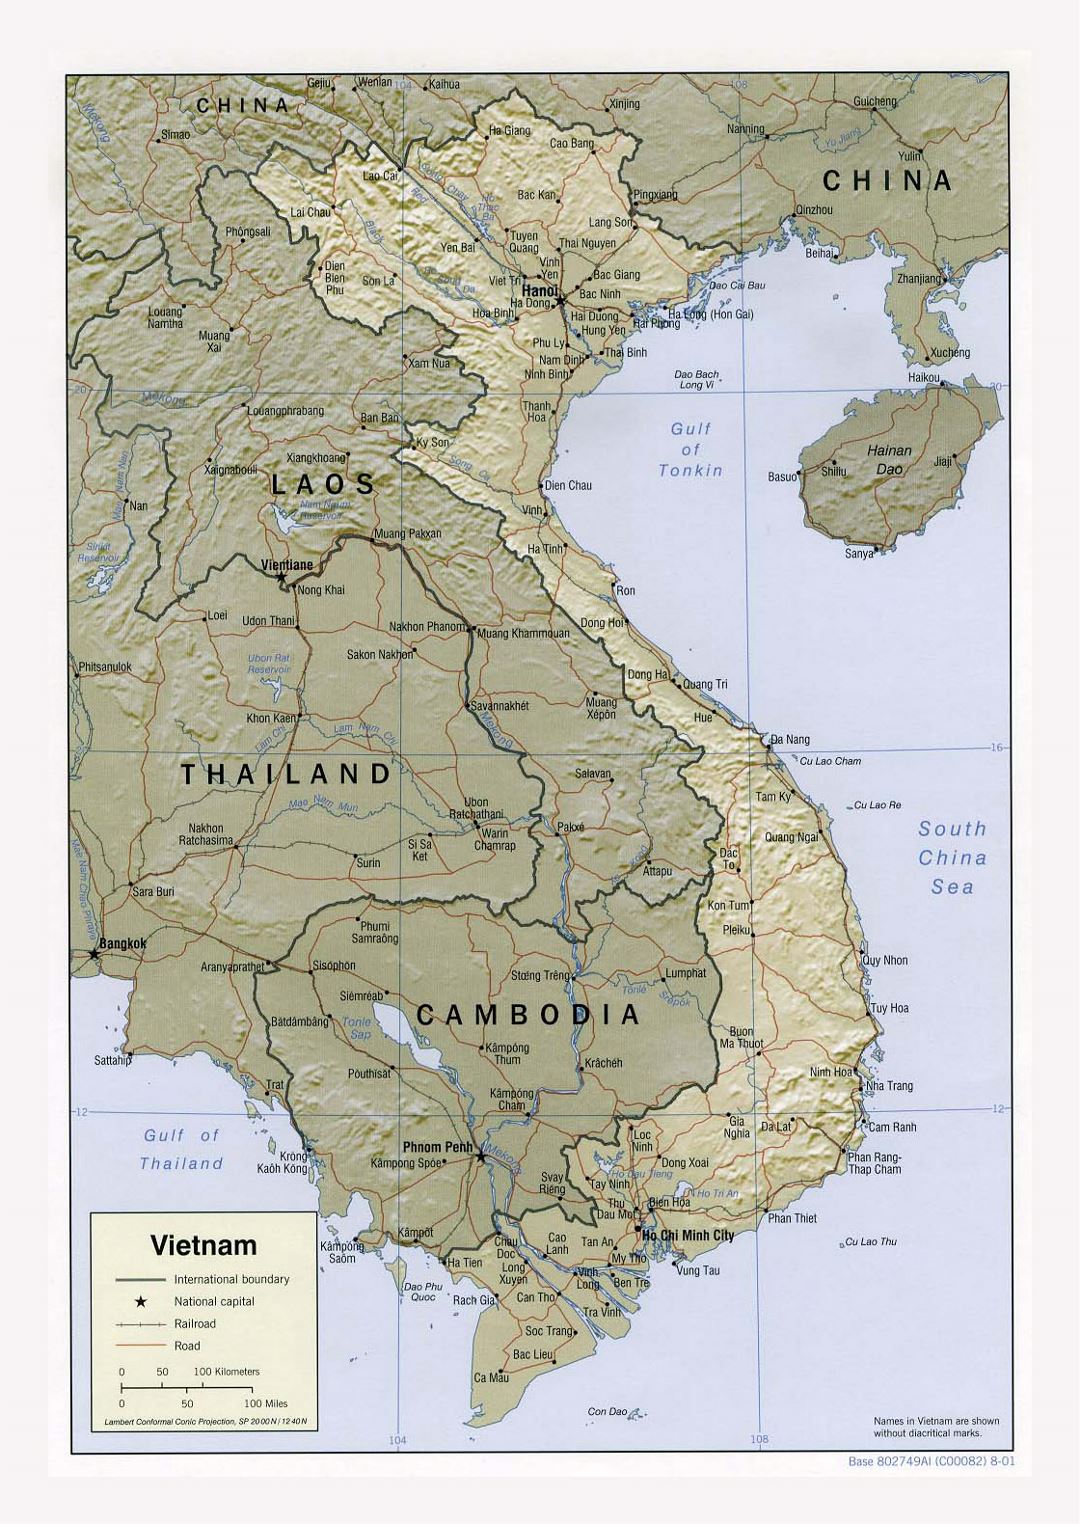 Detailed political map of Vietnam with relief, roads, railroads and major cities - 2001